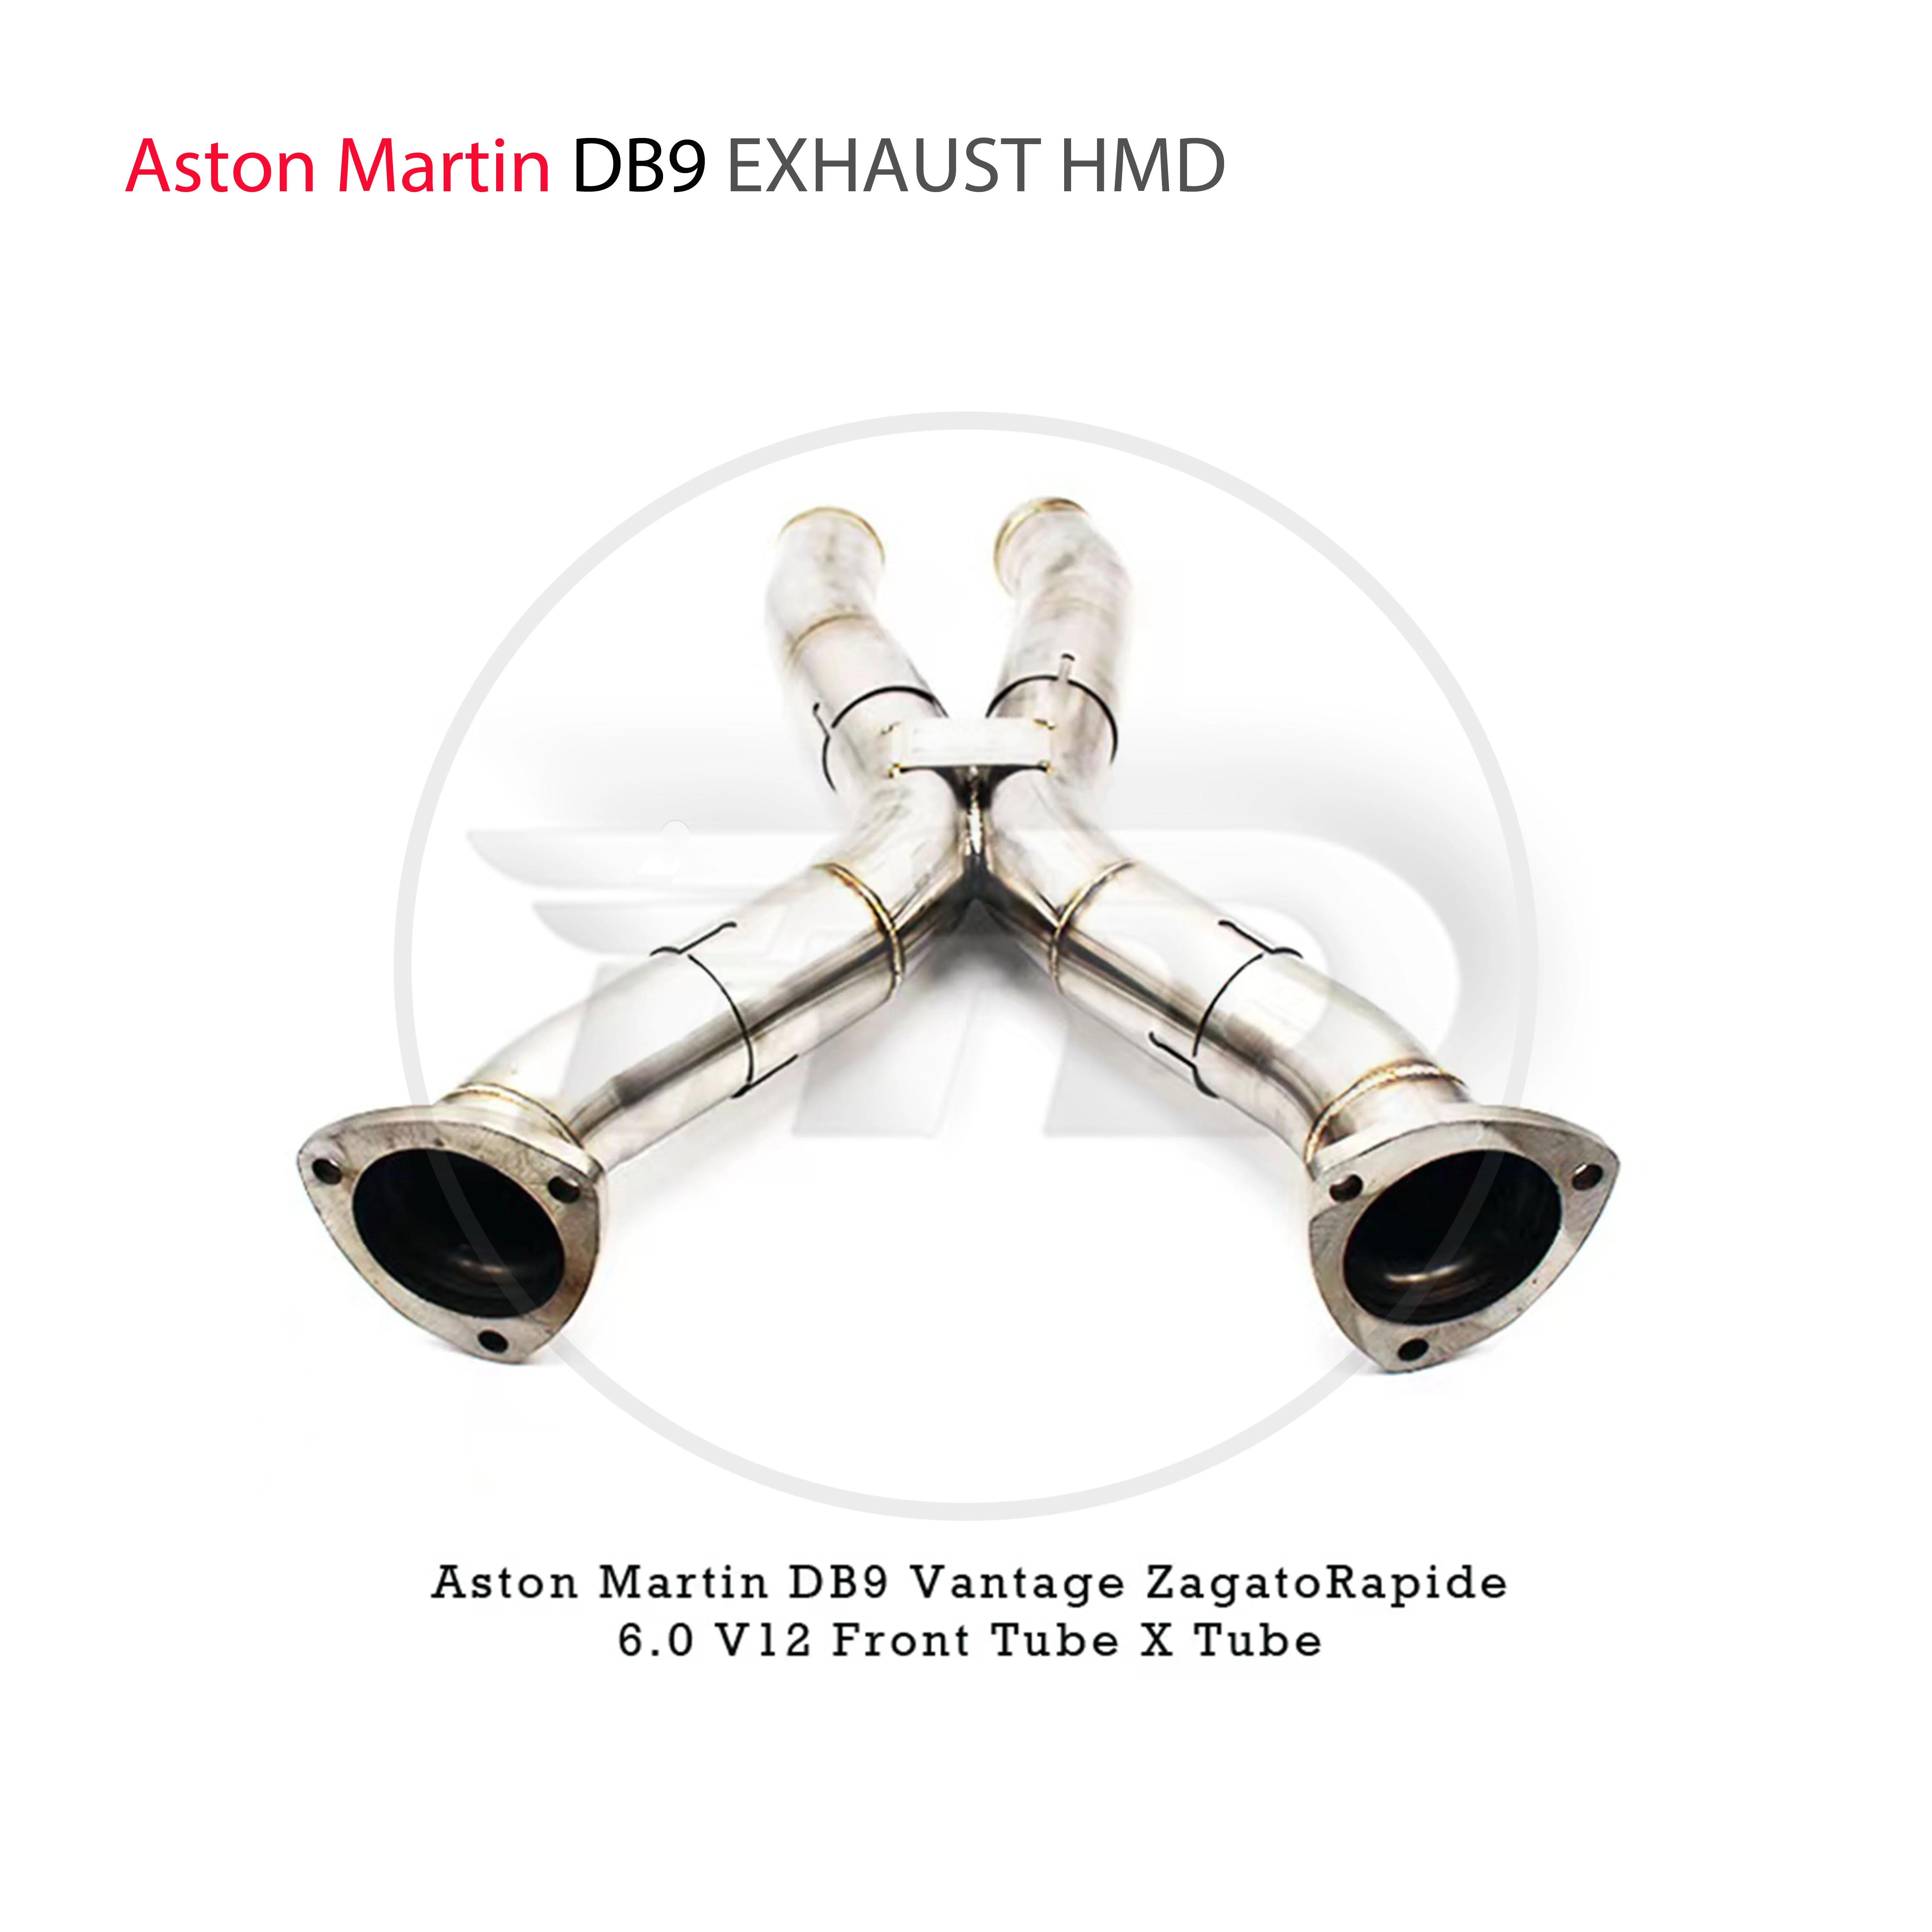 

HMD Exhaust System Front Pipe X Tube for Aston Martin DB9 Vantage Zagato Rapide 6.0L V12 Without Cat